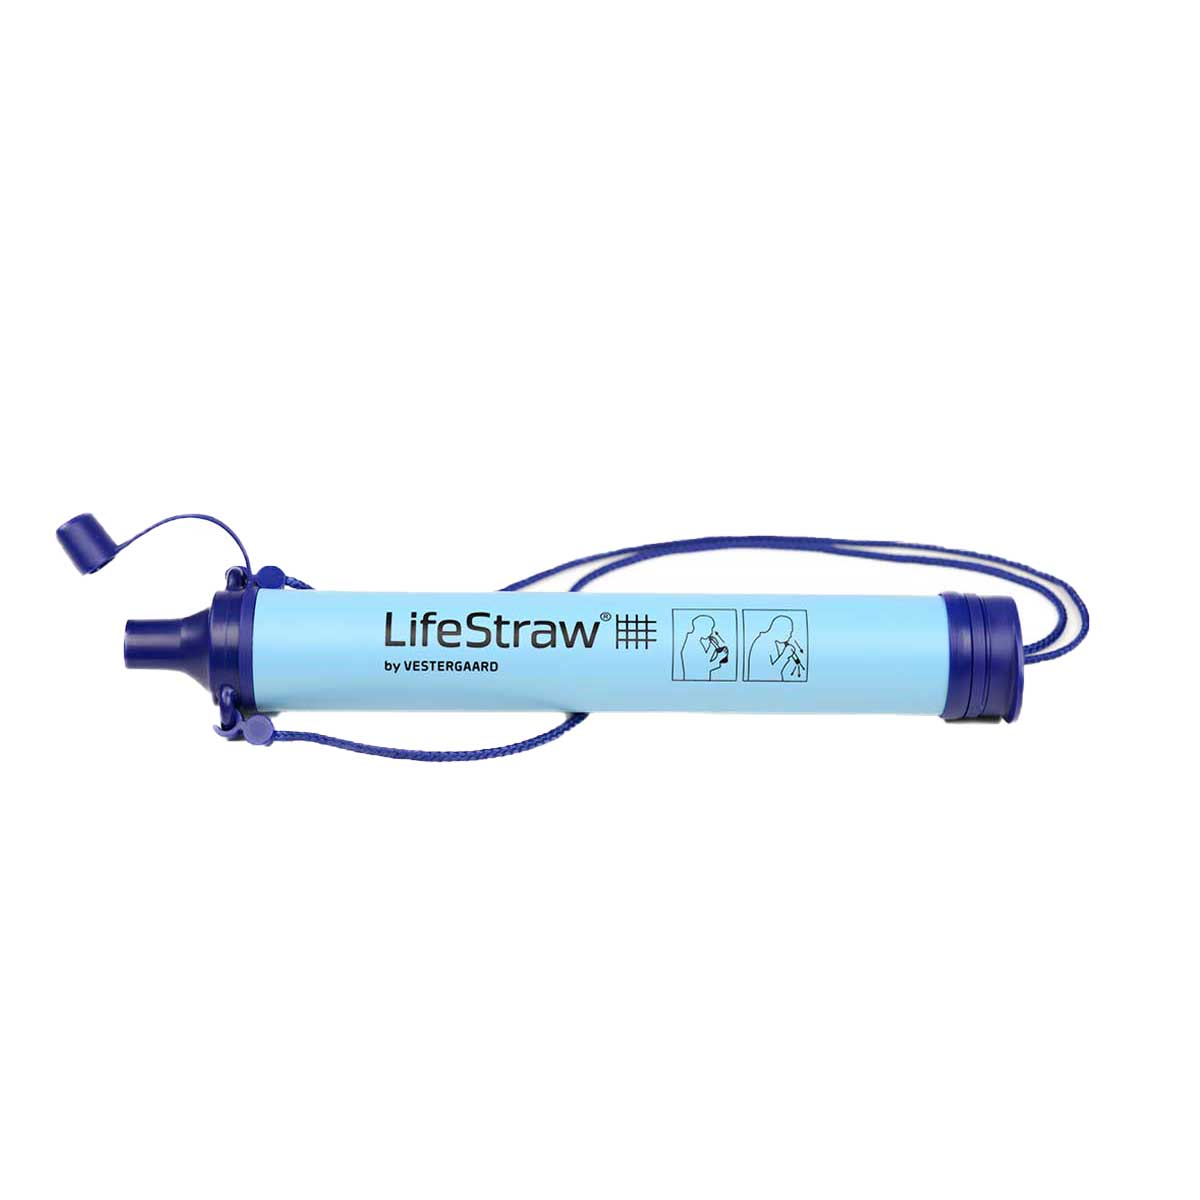 LifeStraw - Personal survival water filter - (Green) - Survival